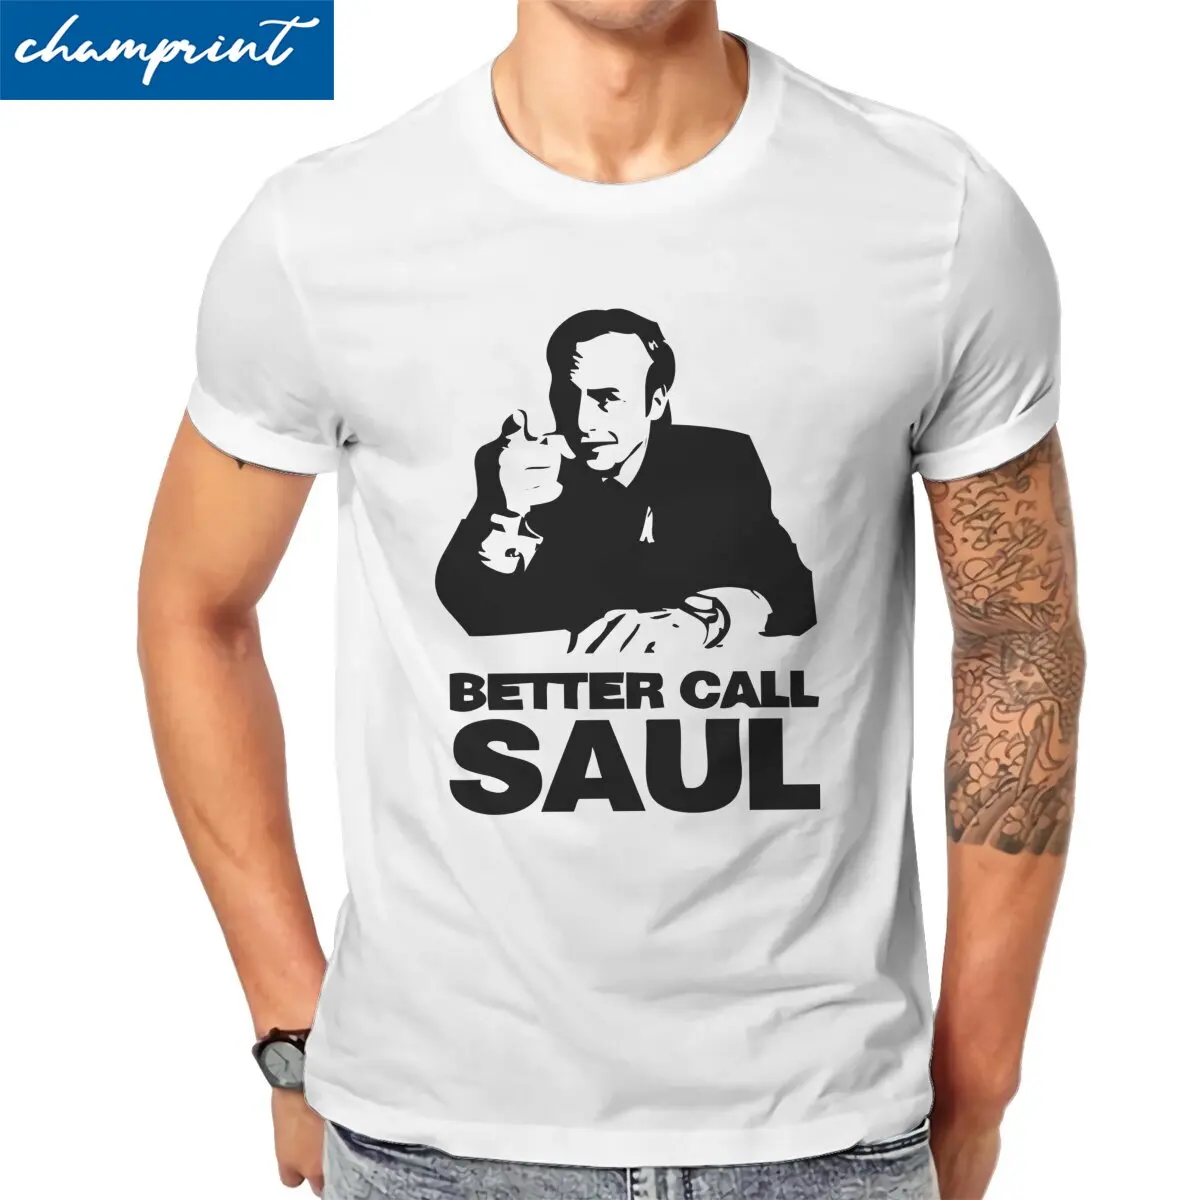 

Better Call Saul T Shirts for Men Pure Cotton Funny T-Shirts Crew Neck Breaking Bad Saul Goodman Attorney Clothing Summer